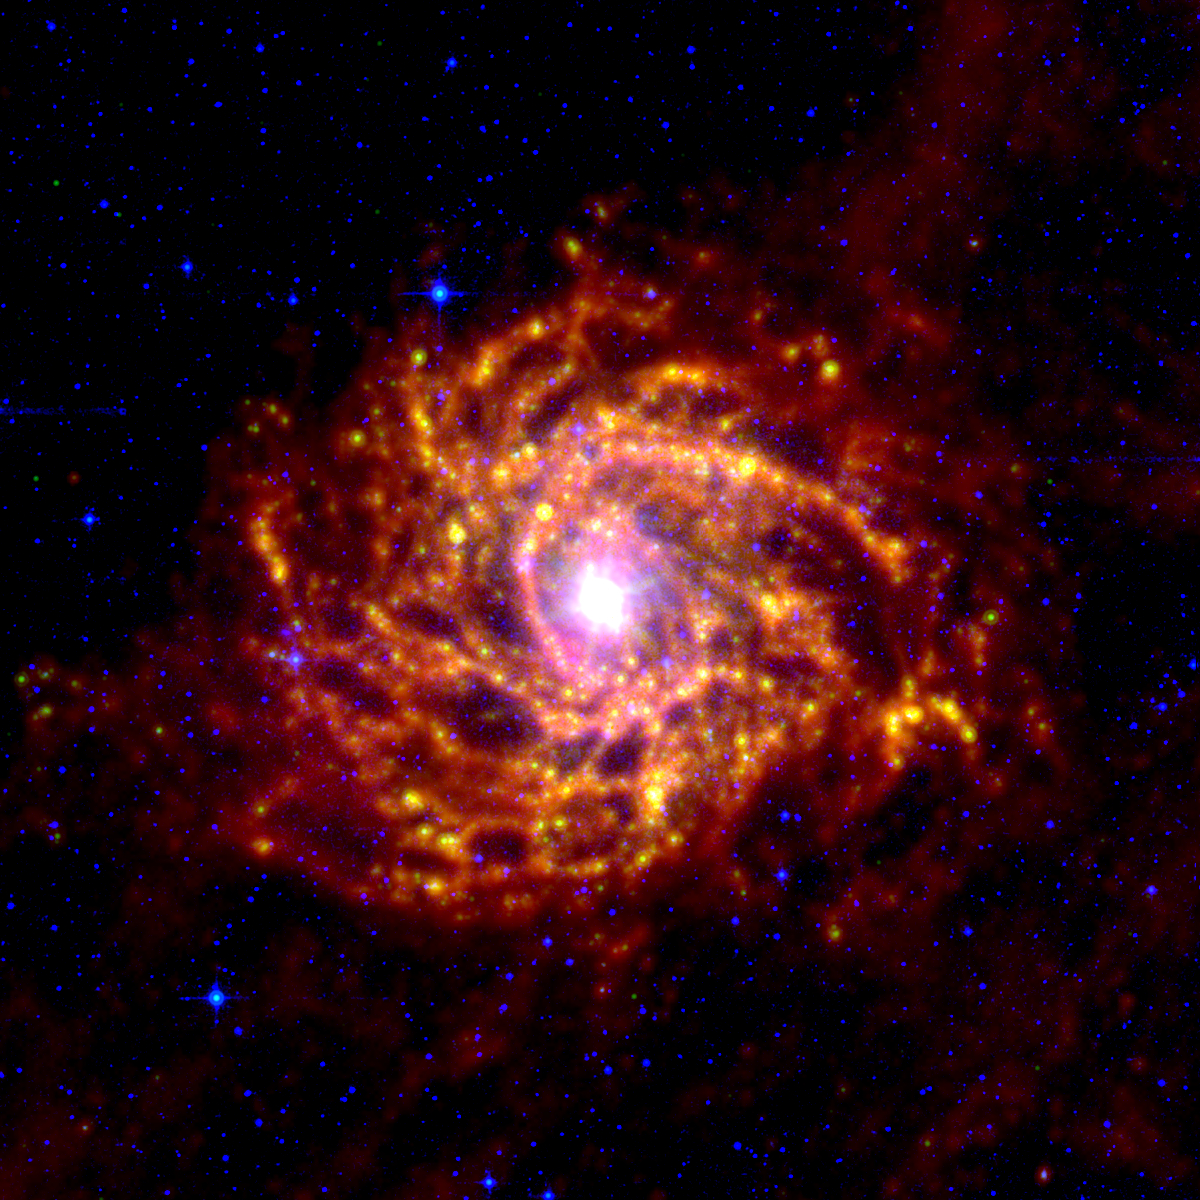 IC 342 as seen in the infrared